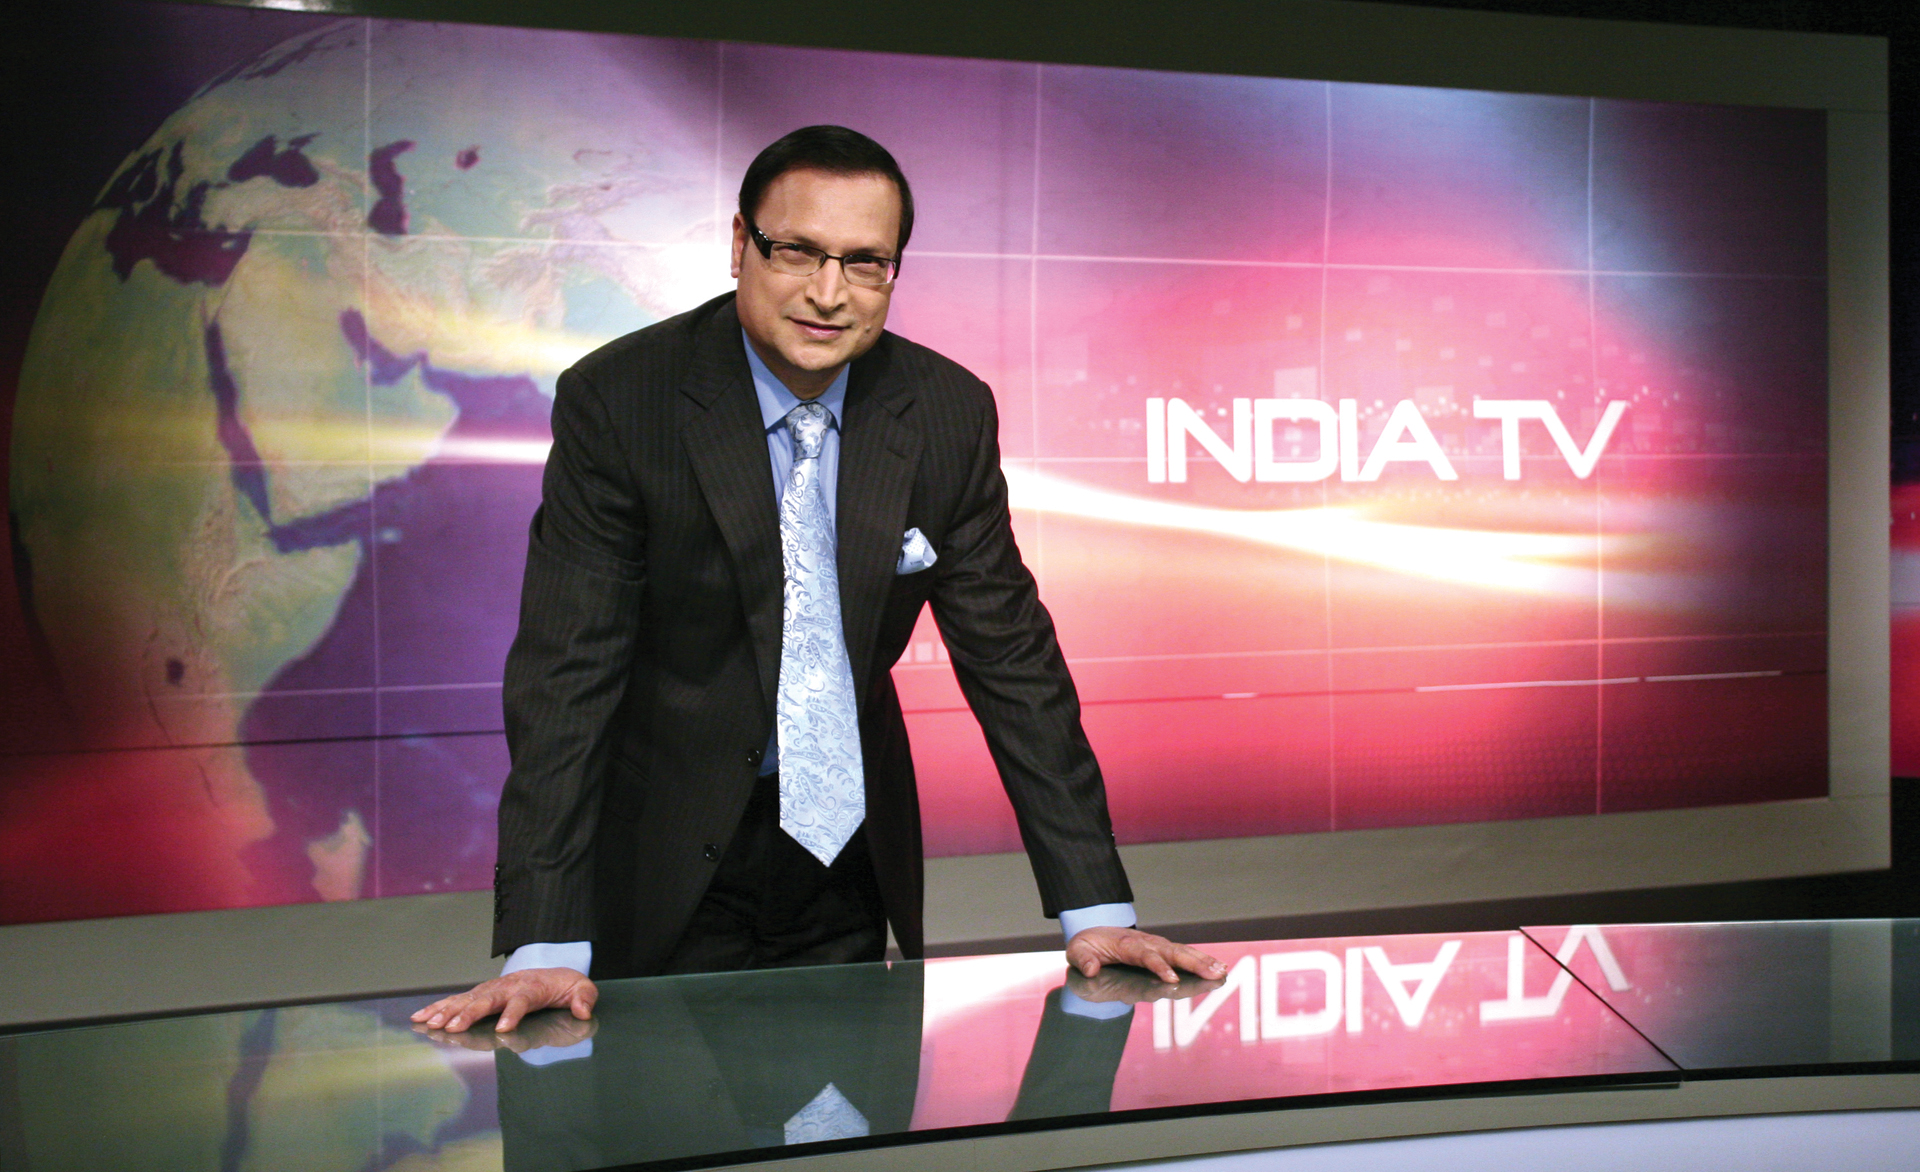 Rajat Sharma’s path to becoming India’s most powerful editor-entrepreneur